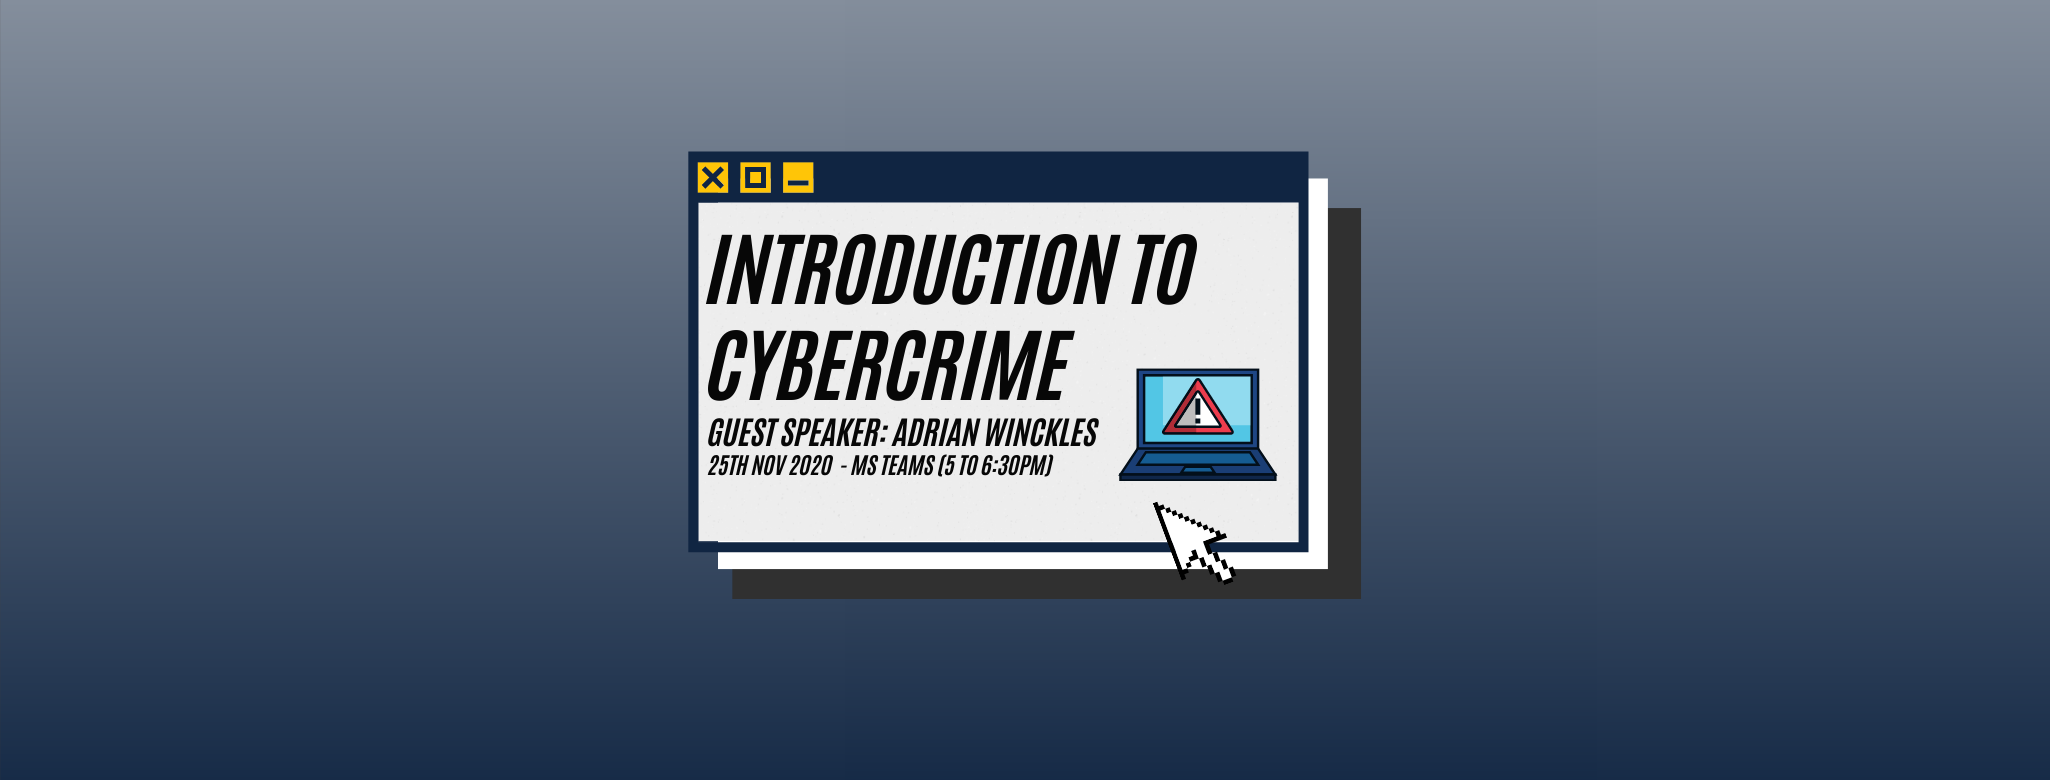 Introduction to Cybercrime Header